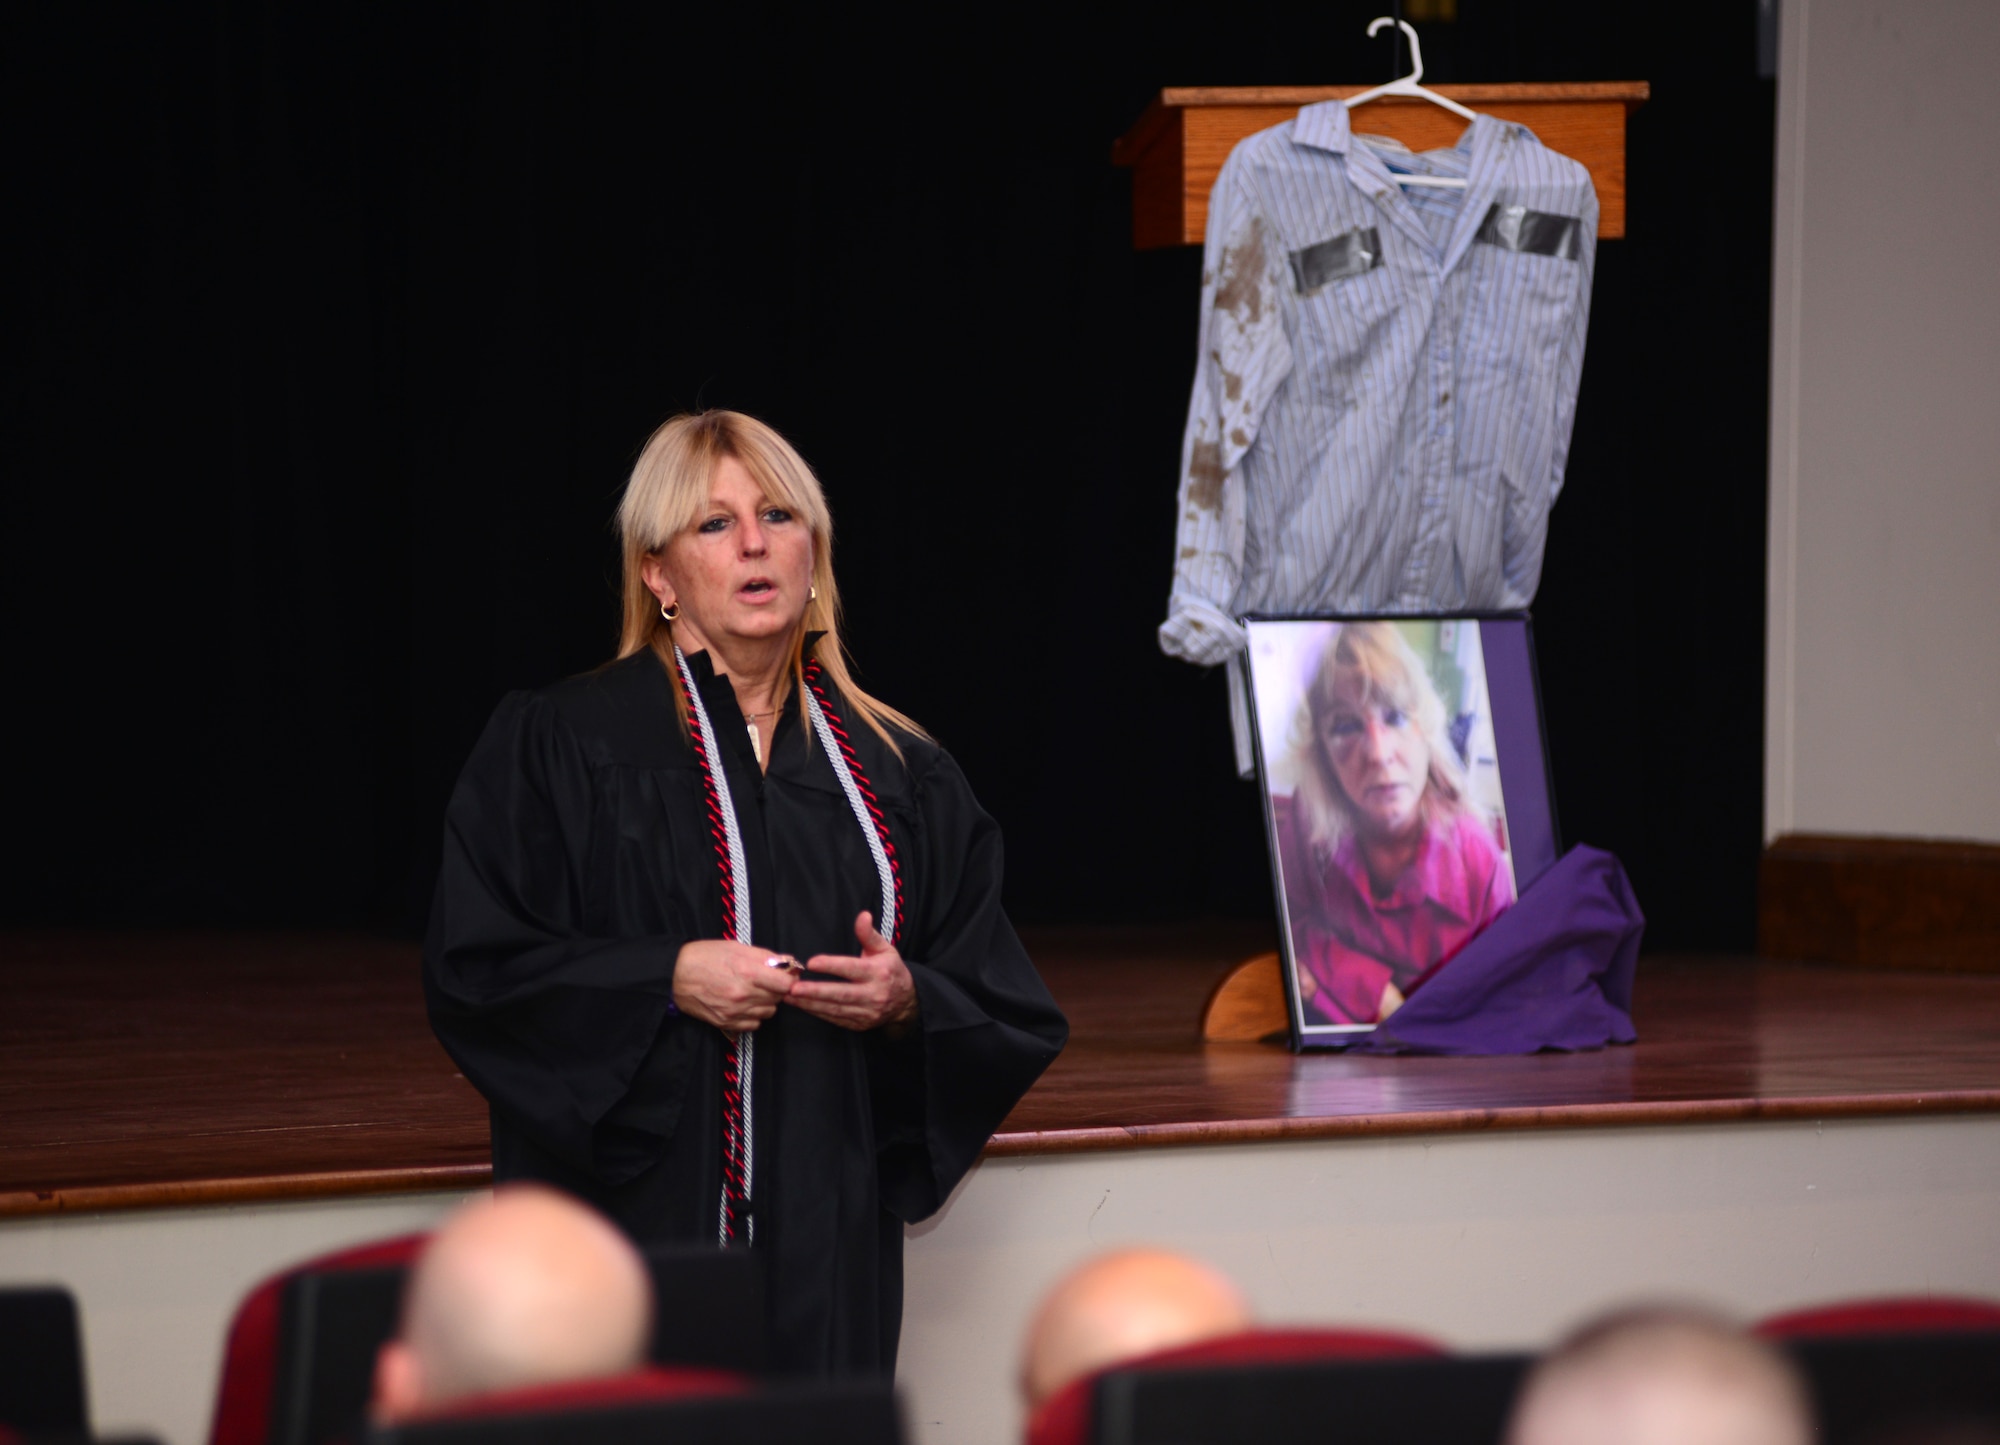 Lois Sparber, Hampton, Va., resident, speaks to an audience about her experience as a victim of domestic violence during a briefing at Fort Eustis, Va., Oct. 21, 2015. According to Sparber, she was married to her abuser for approximately 20 years before seeking a divorce in lieu of the violence she endured. (U.S. Air Force photo by Senior Airman Aubrey White/Released)